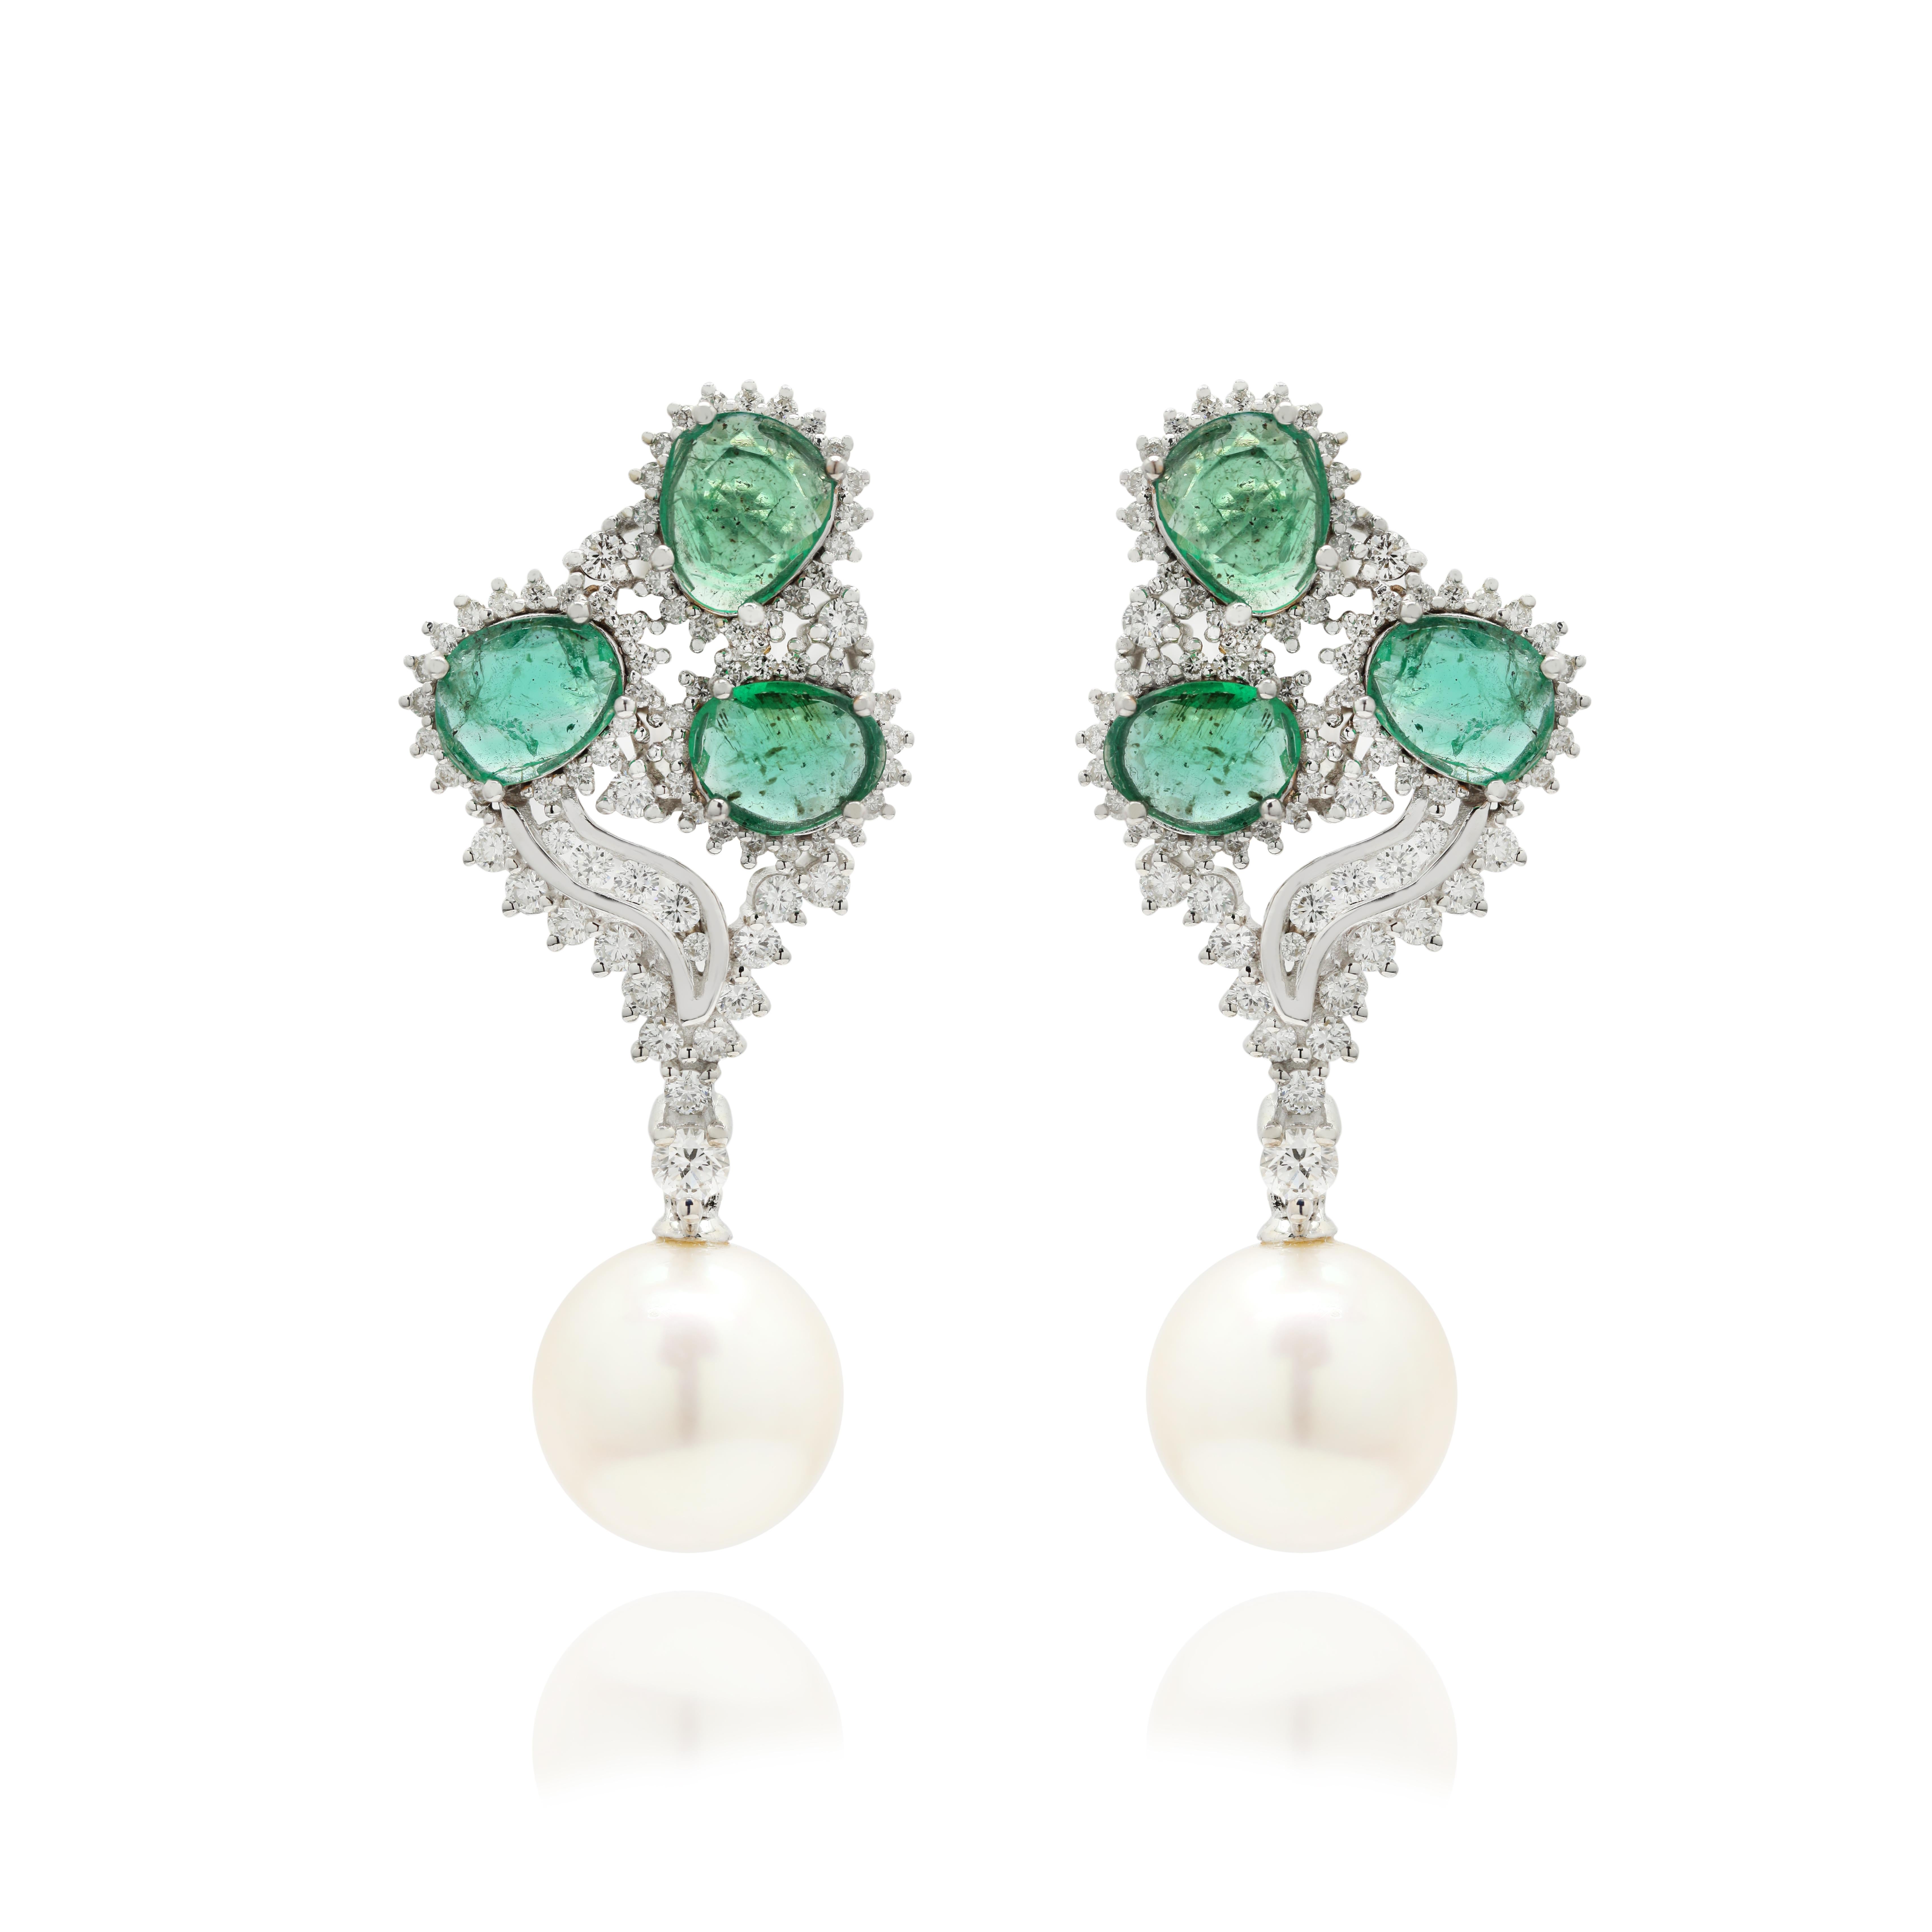 Emerald, Pearl and Diamond Dangle Earrings to make a statement with your look. These earrings create a sparkling, luxurious look featuring oval cut gemstone.
If you love to gravitate towards unique styles, this piece of jewelry is perfect for